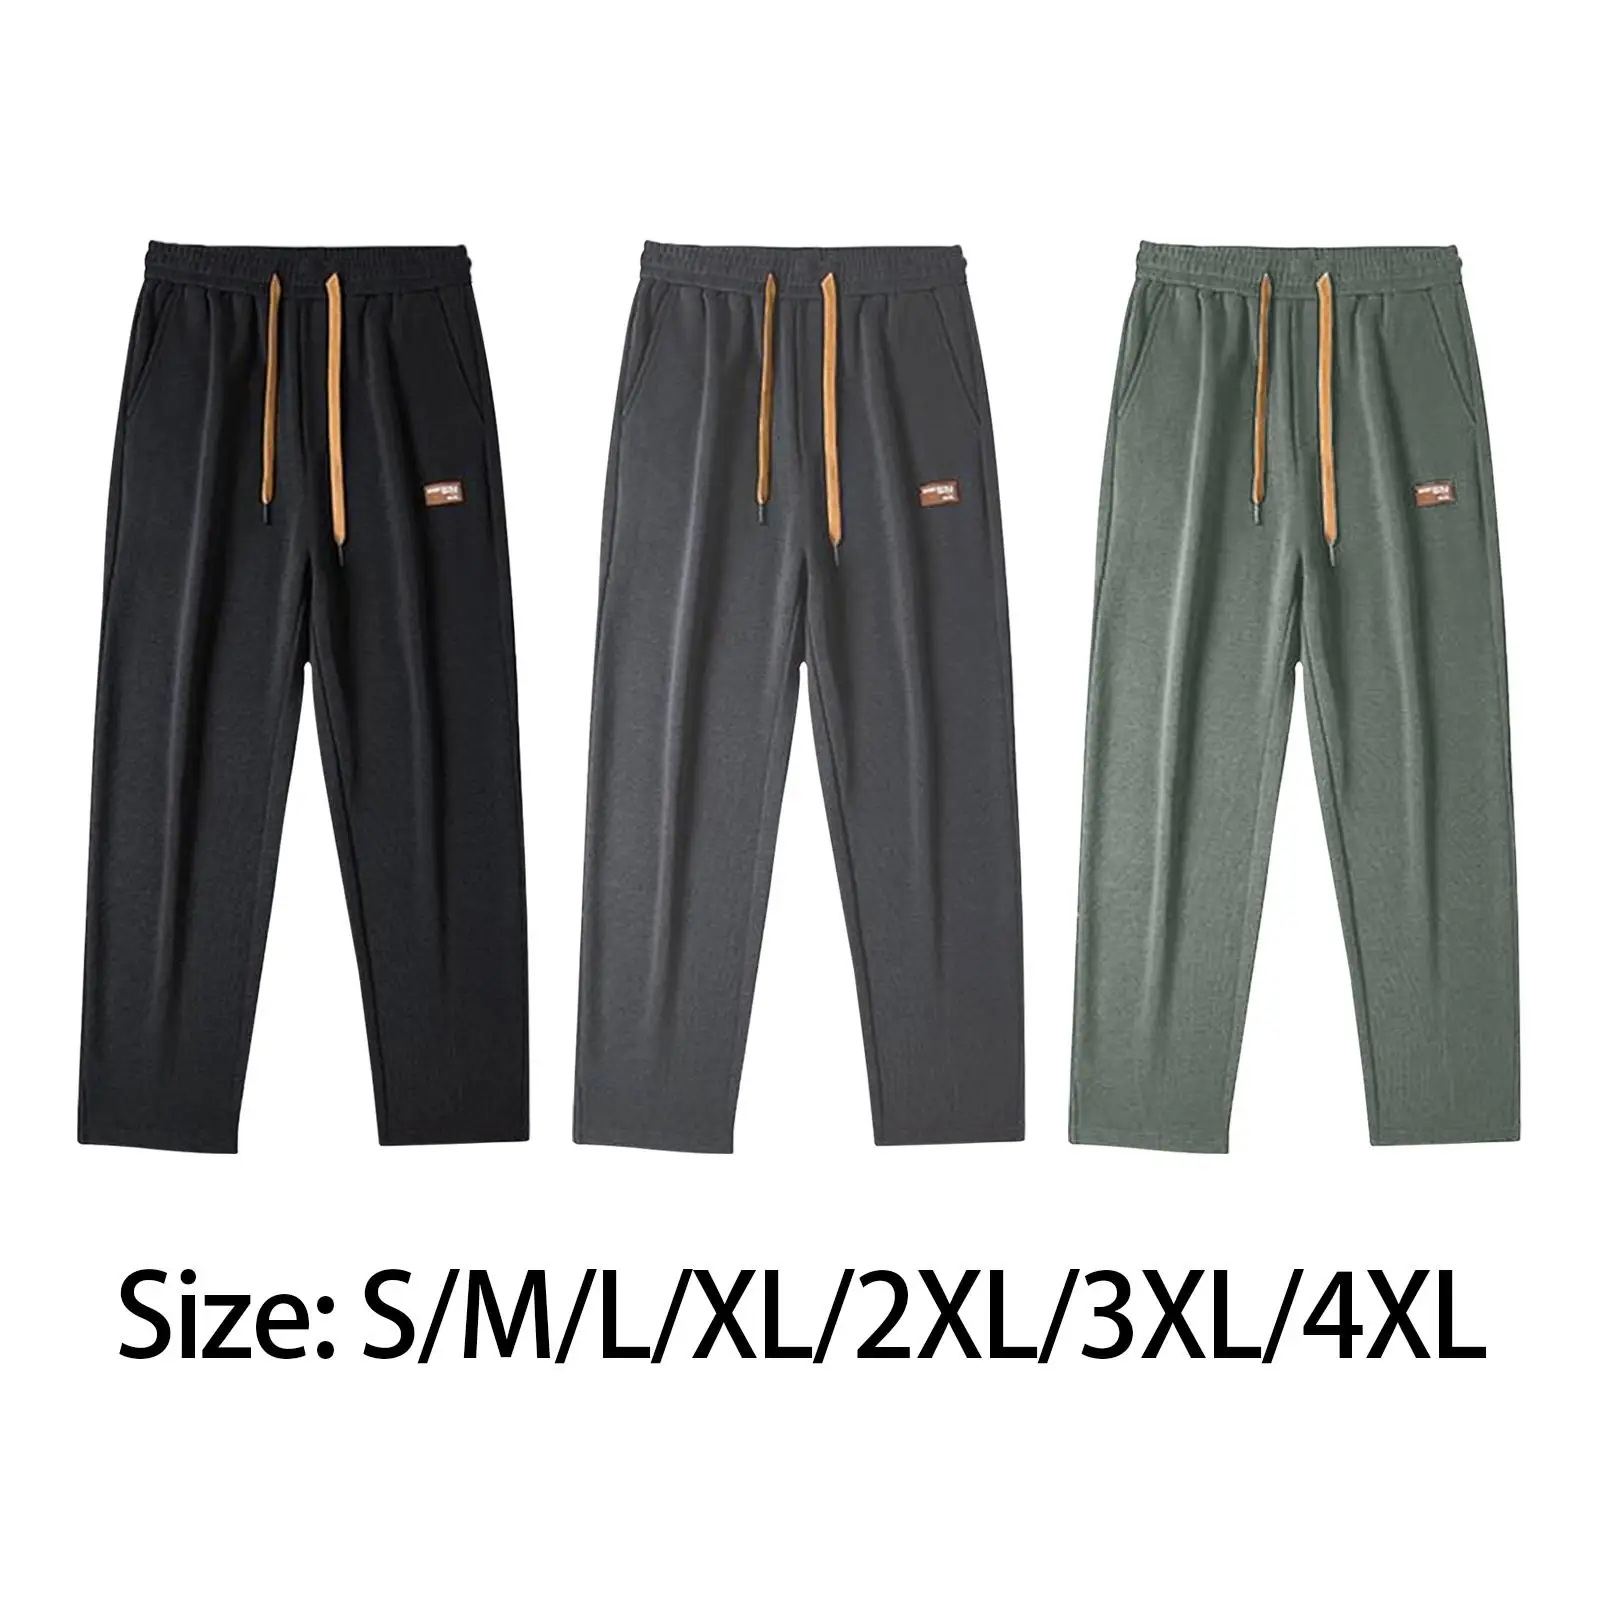 Men Sweatpants Trousers Loose Fit Sports Casual with Pockets Straight Pants for Running Cycling Jogging Hiking Driving